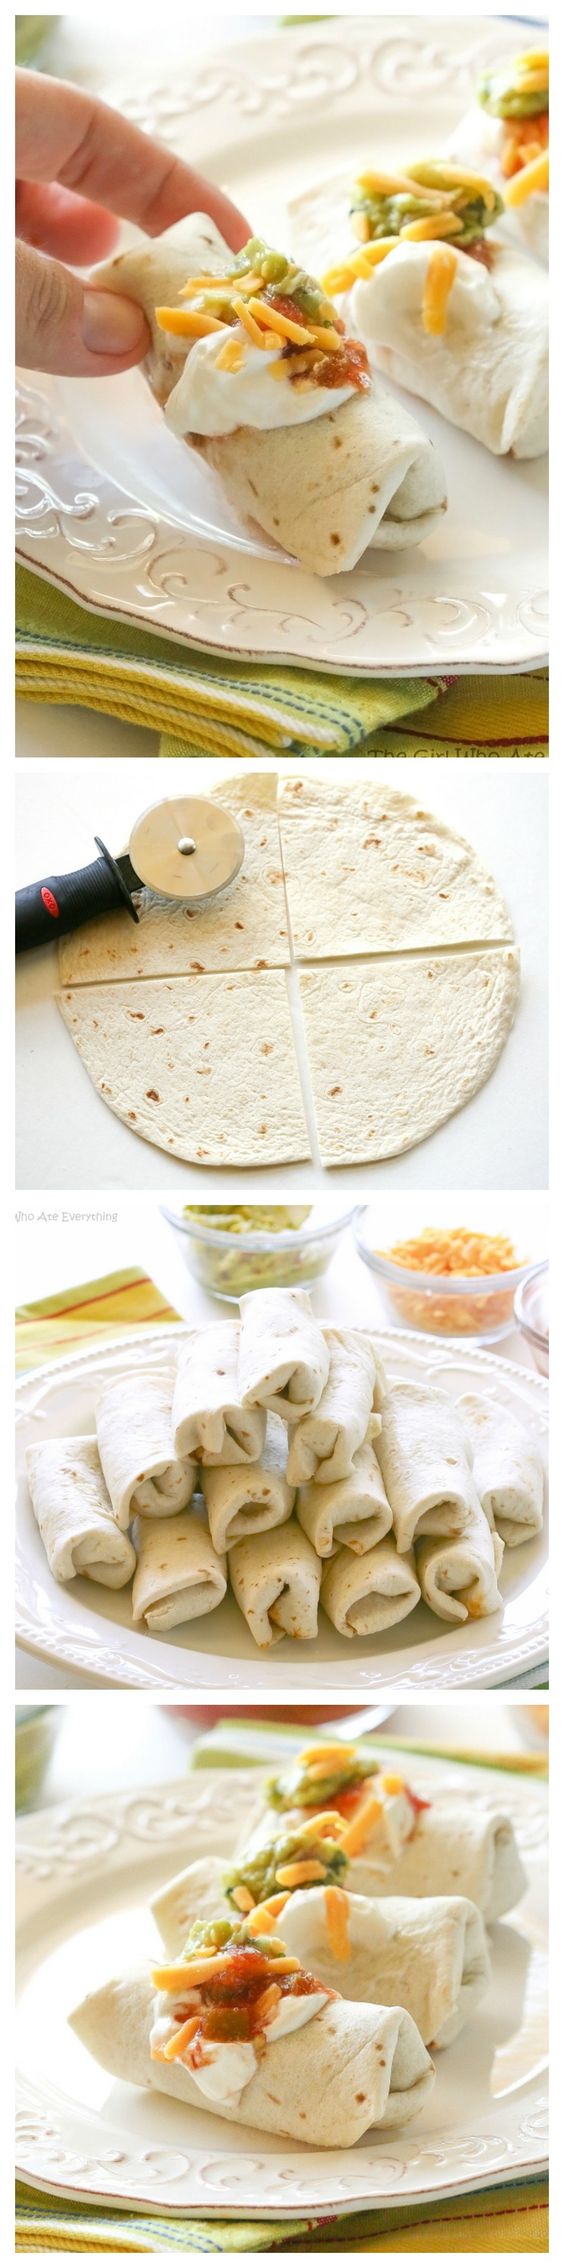 Serve some mini burritos already made or let your guests top their own.